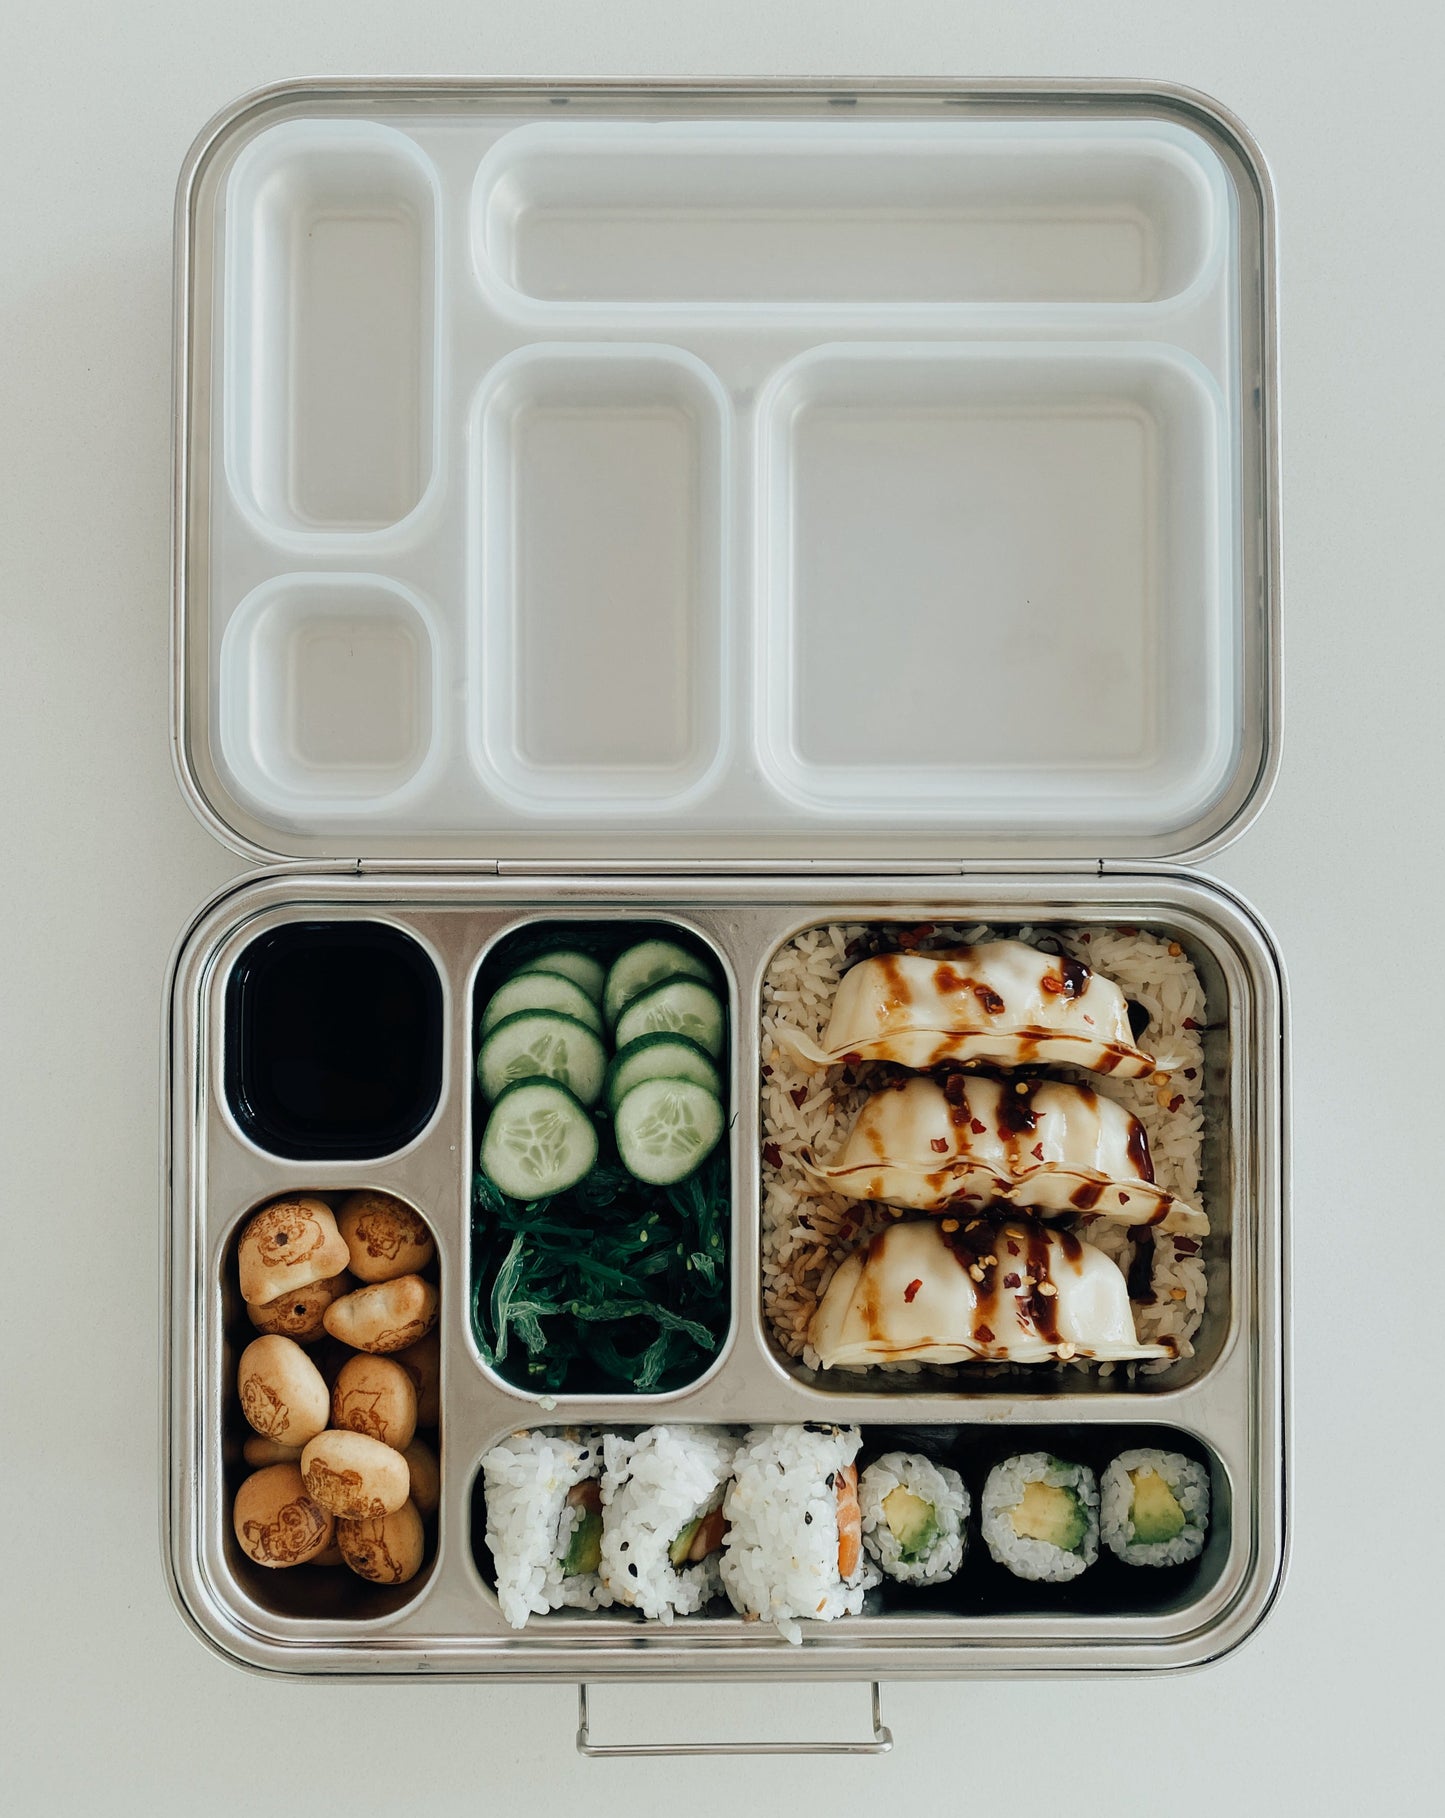 Stainless steel bento box with 5 compartments. Sustainable, eco-friendly, and zero plastic lunchbox alternative. Traditional bento arrangement with sushi, bed of rice, pork gyoza, seaweed salad, pickled cucumber, dipping soy sauce, and chocolate biscuit treats.